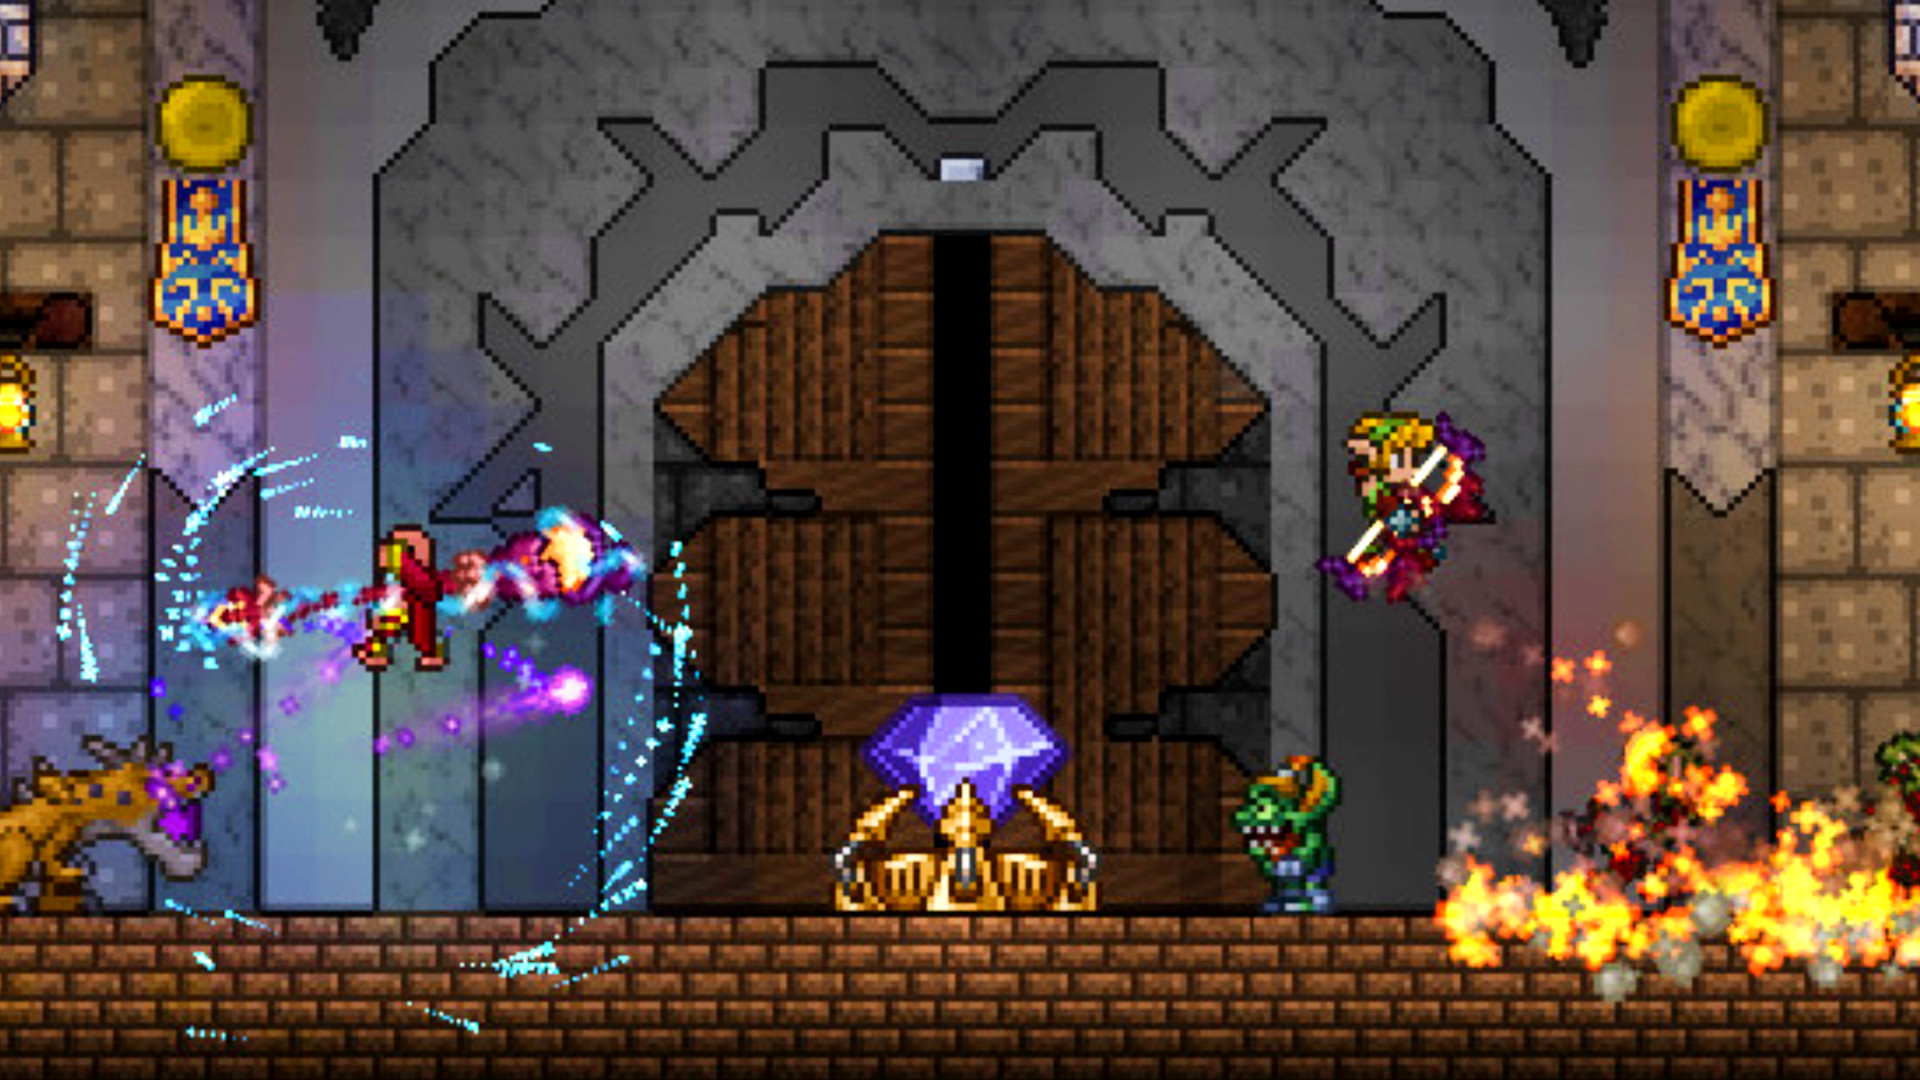 Terraria crossplay testing is underway, and we've already seen a tease